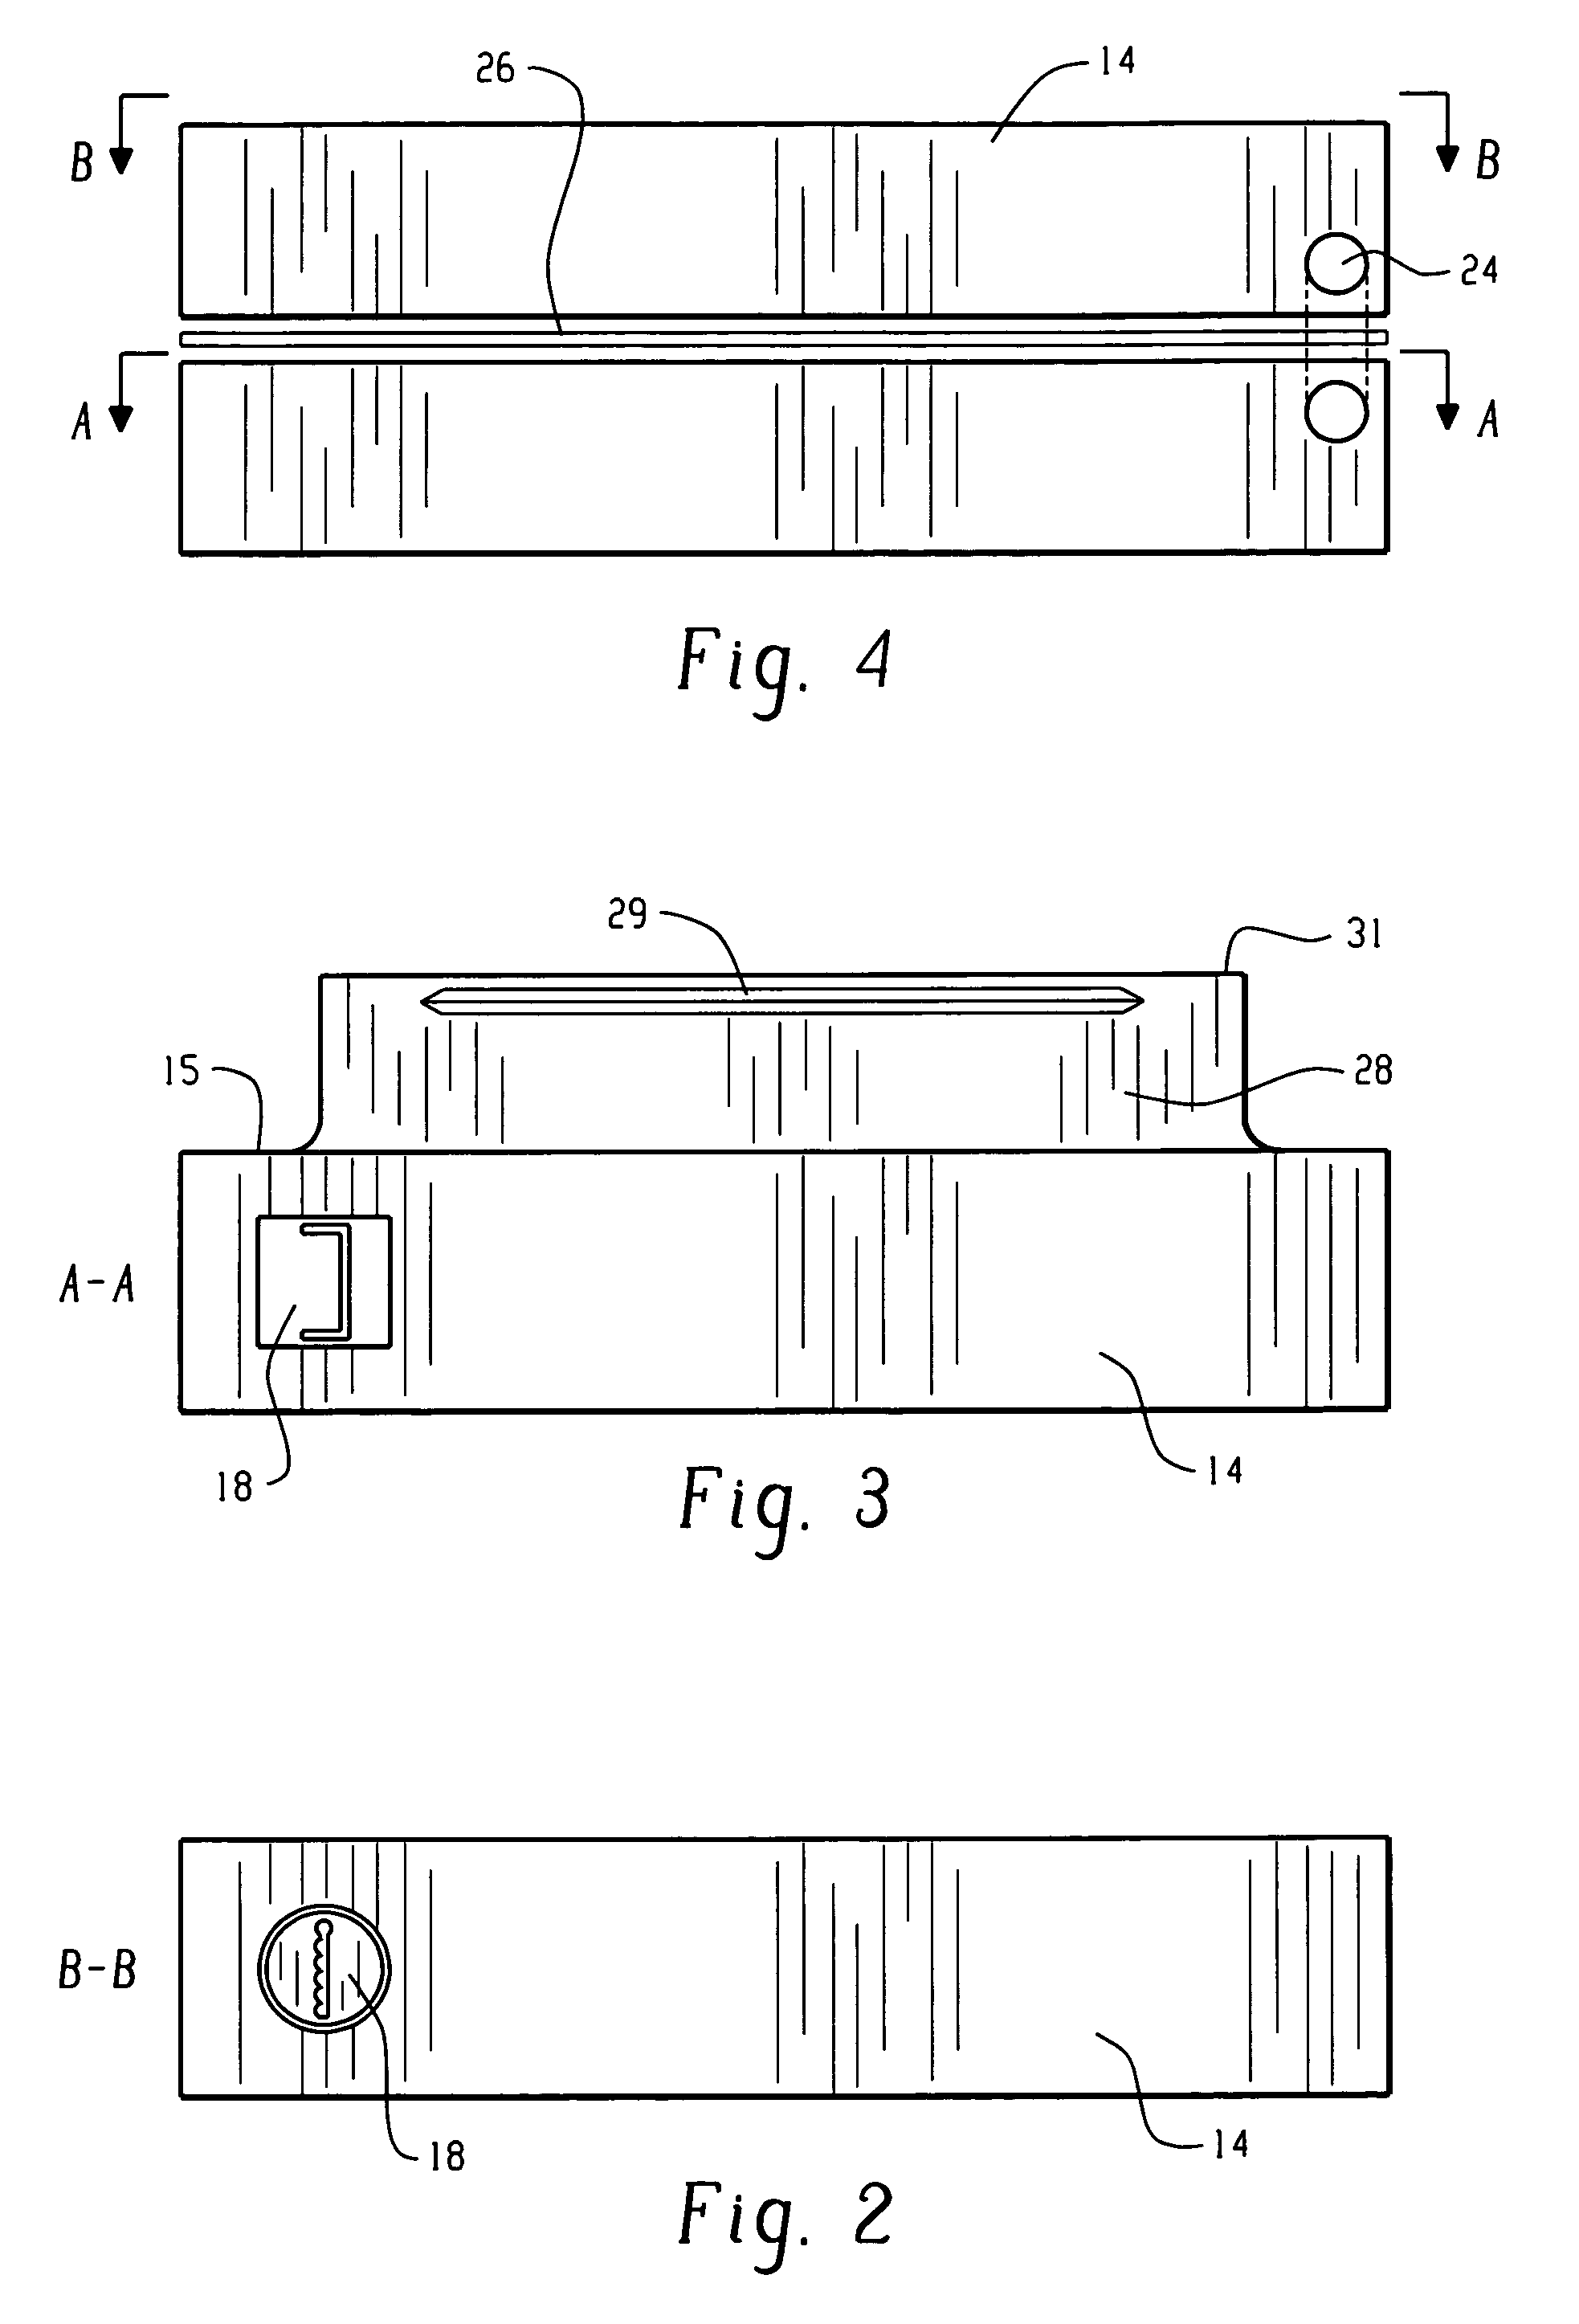 System for physically securing an access point and preventing the removal of associated connectors